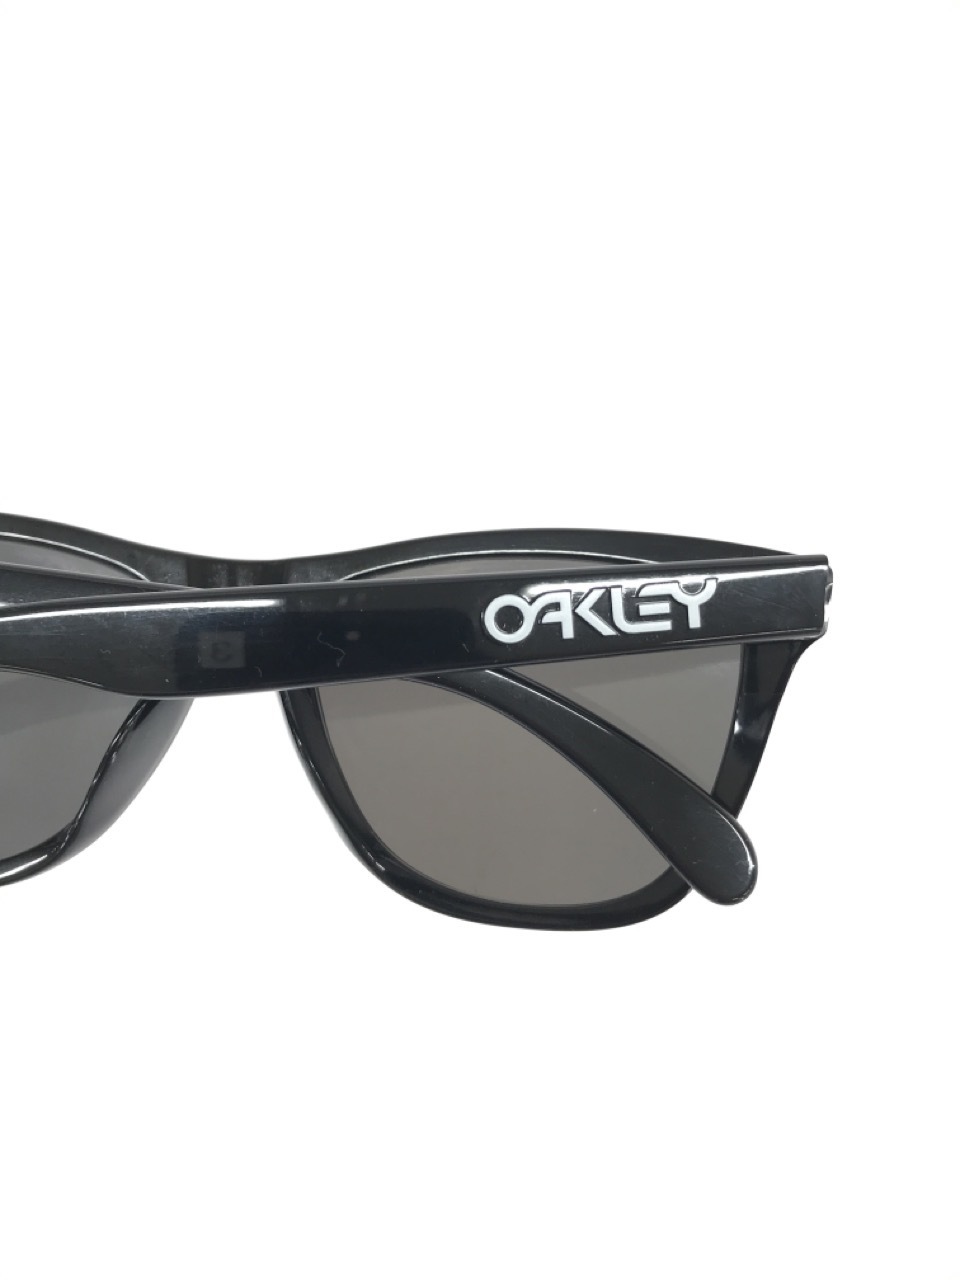 USED OAKLEY FROGSKINS PRIZM ASIA FIT VERYGOOD #D53 | eBay